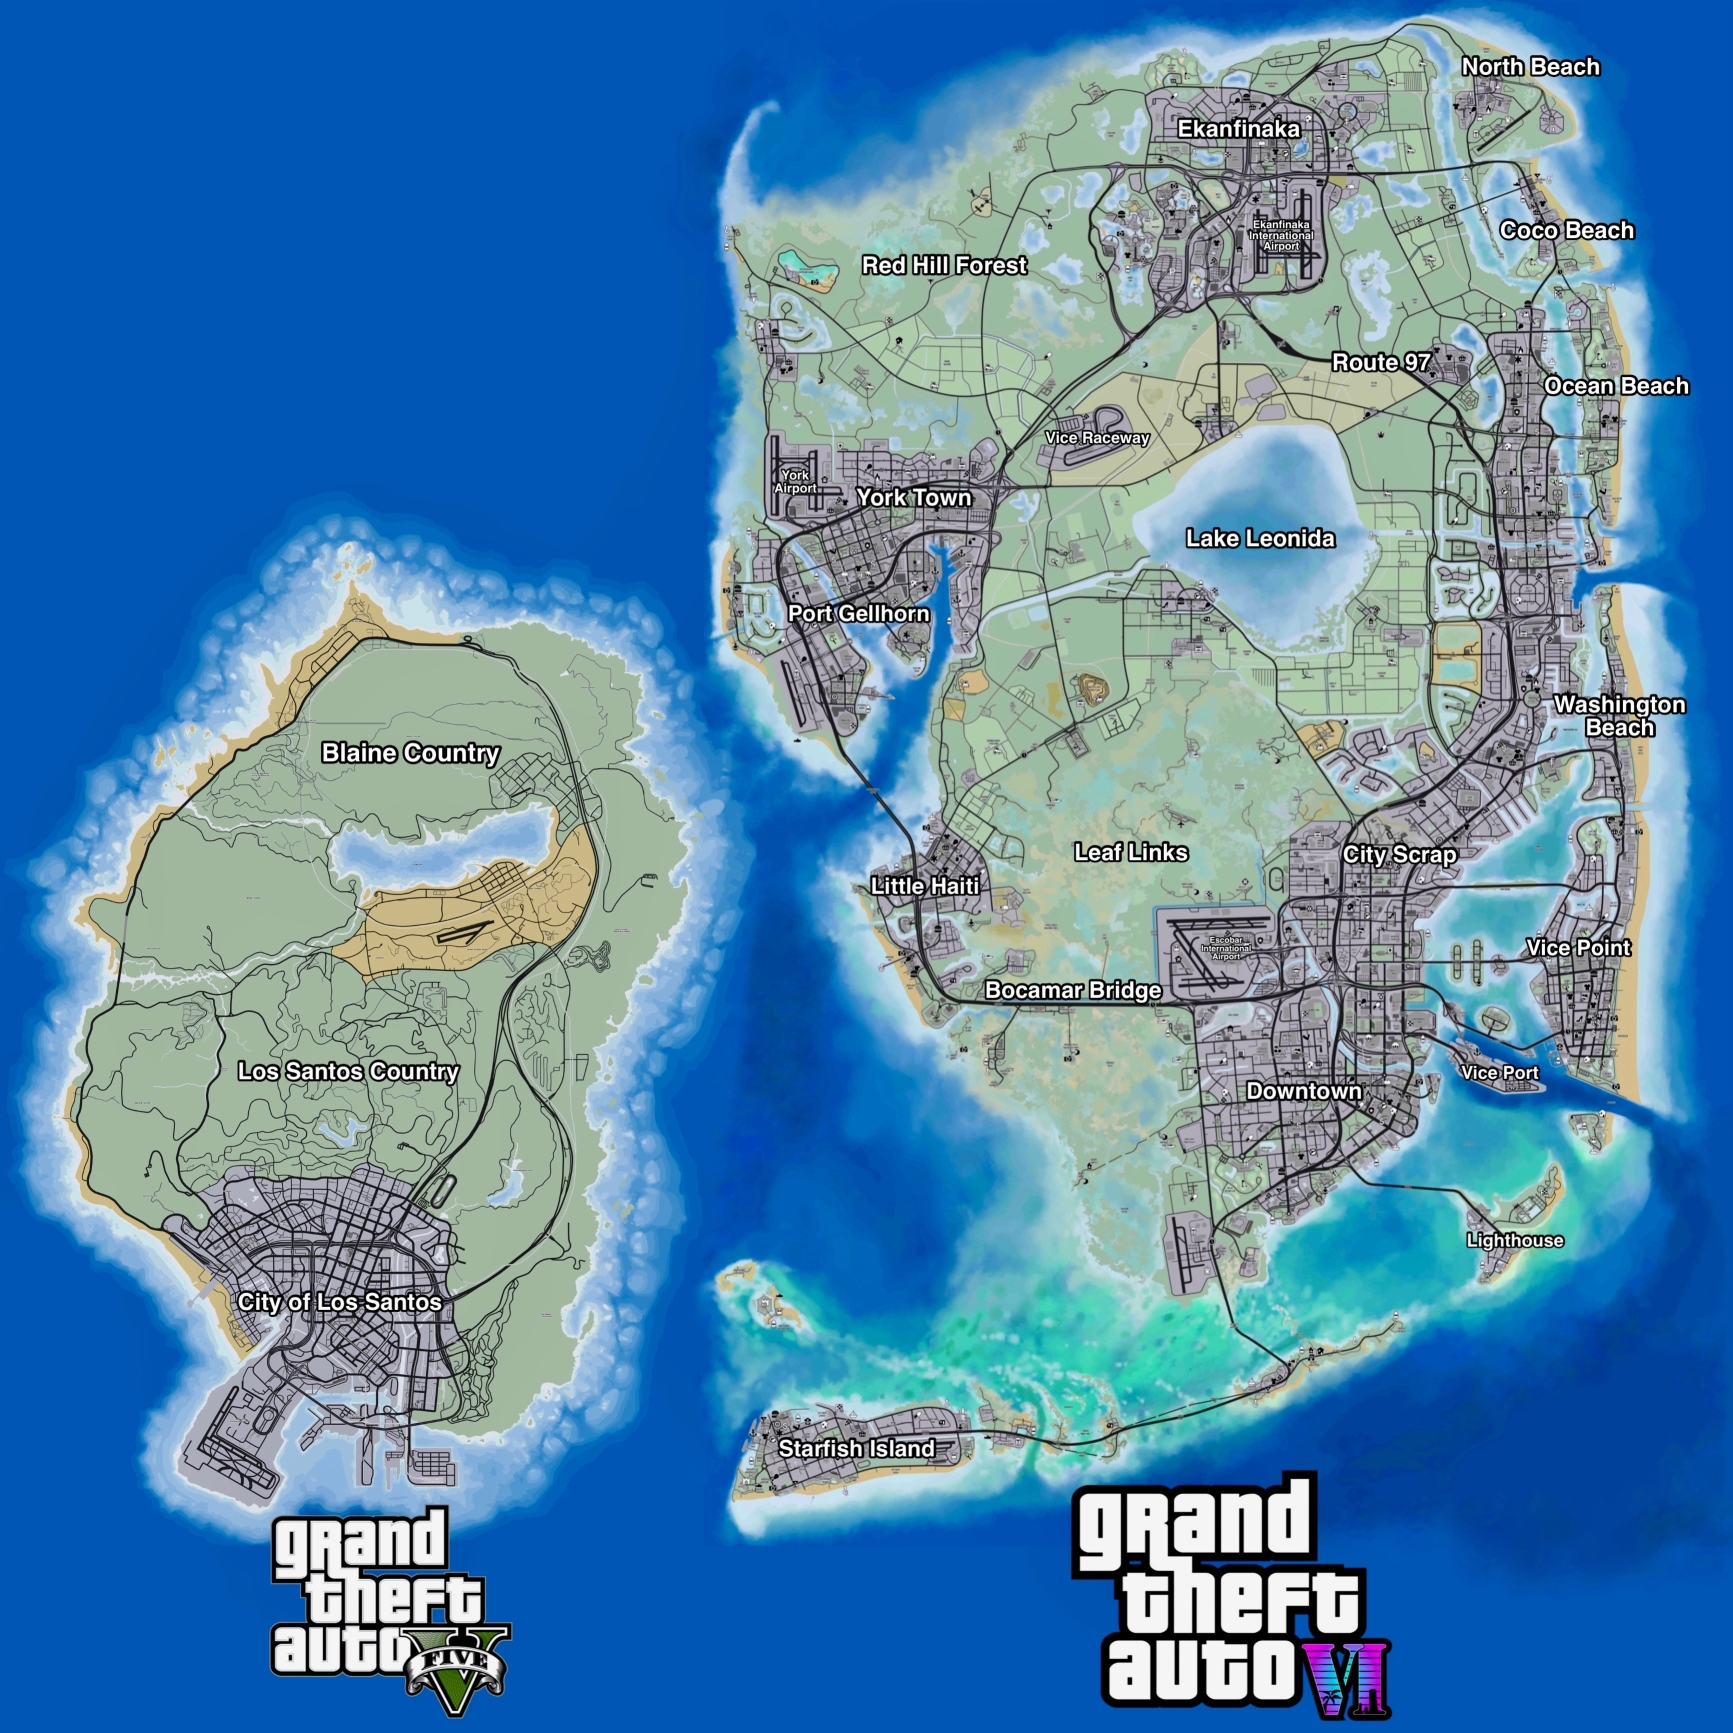 GTA 6 “leaked” Vice City map size compared to GTA V's Los Santos